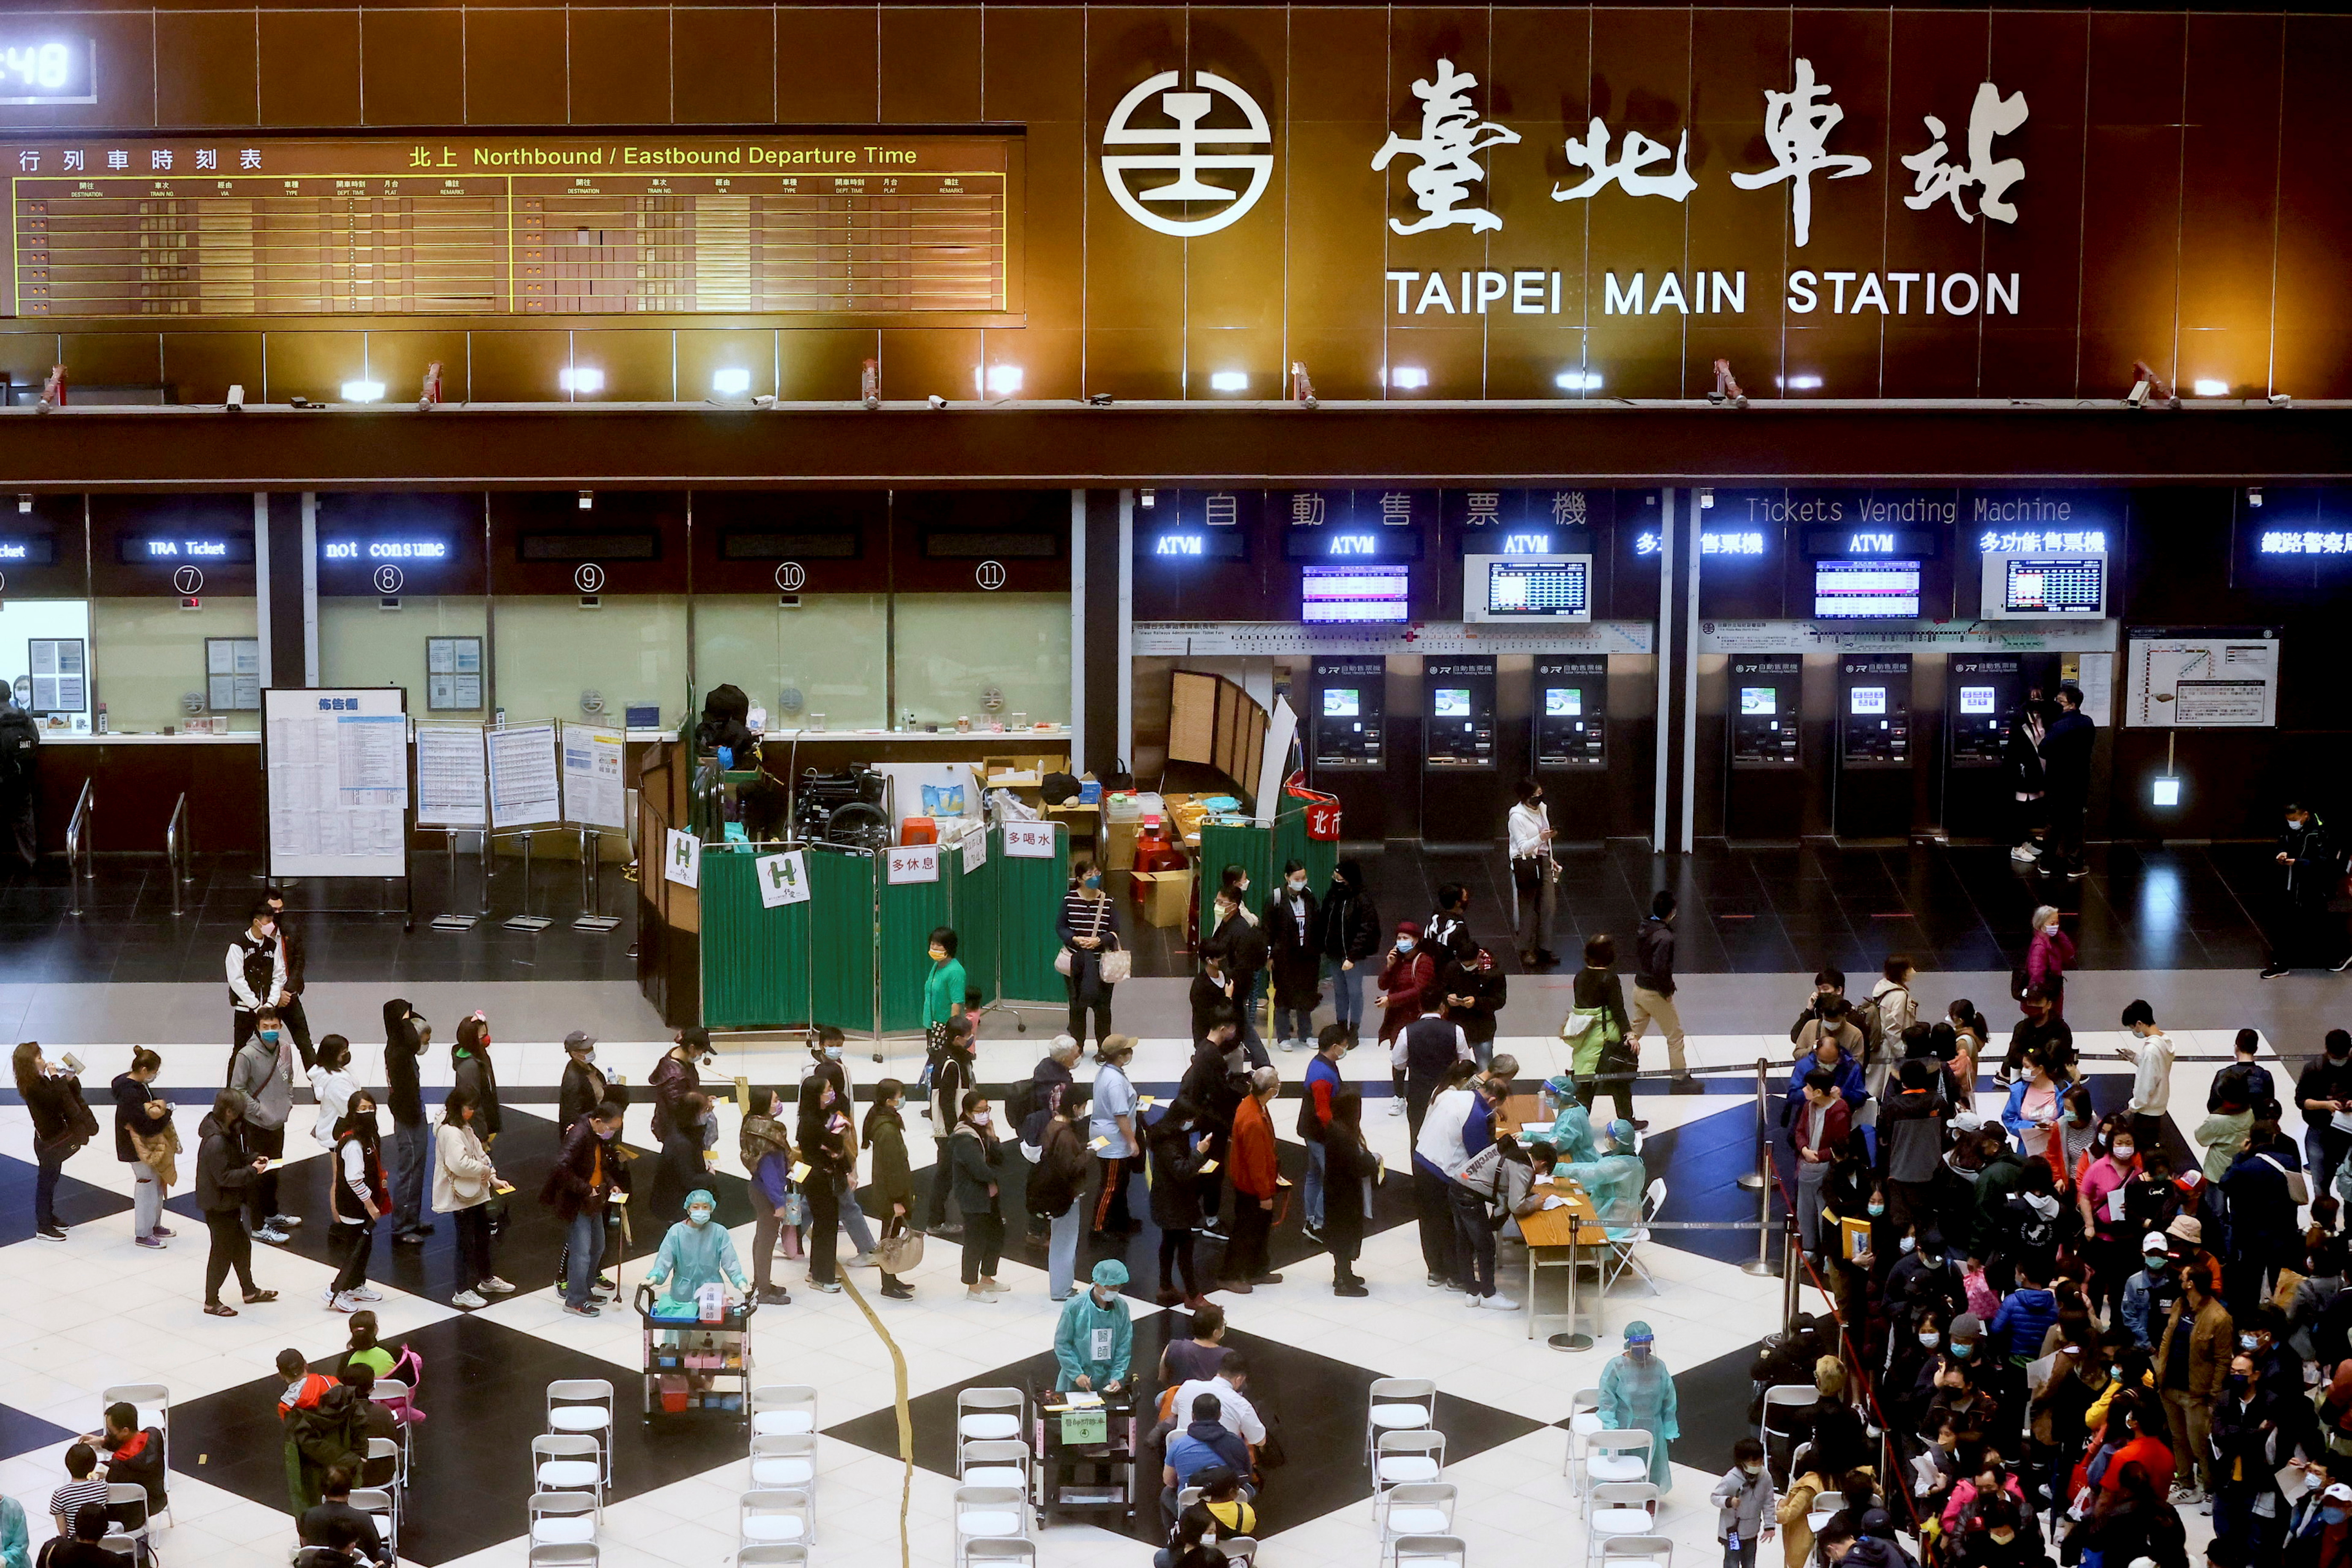 People wait to receive their booster shot of the coronavirus disease (COVID-19) vaccine at the lobby of Taipei main station ahead of Lunar new year in Taipei, Taiwan, January 24, 2022. REUTERS/Ann Wang